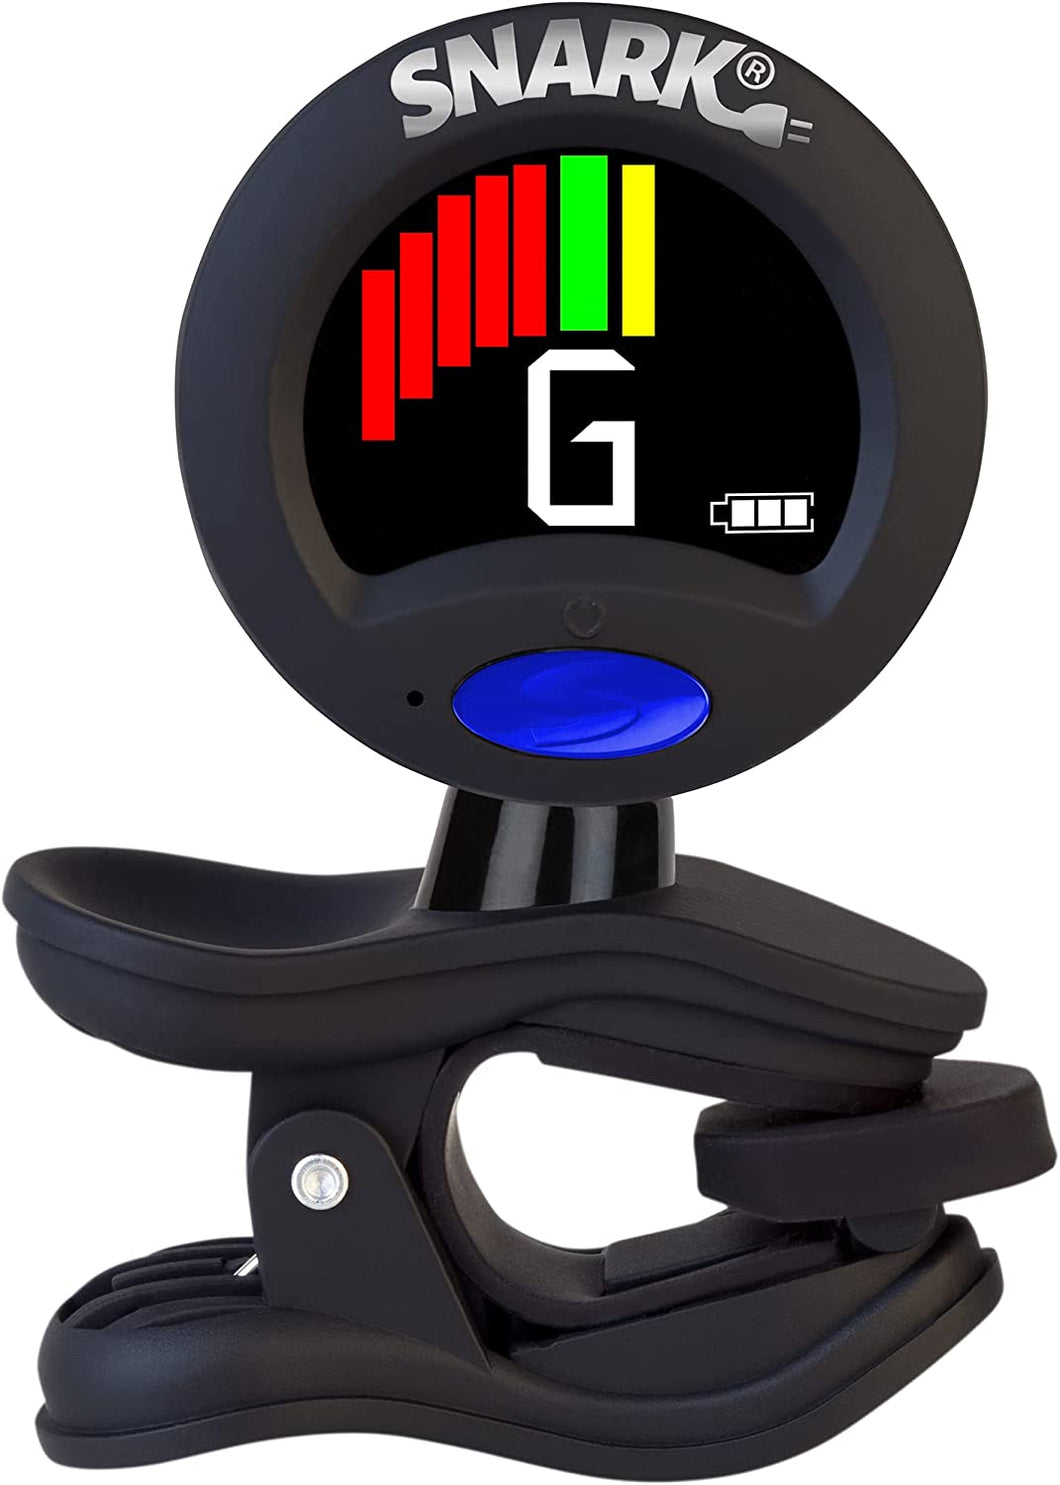 Snark Super Tight SST-1 Rechargeable Tuner with Case Bundle